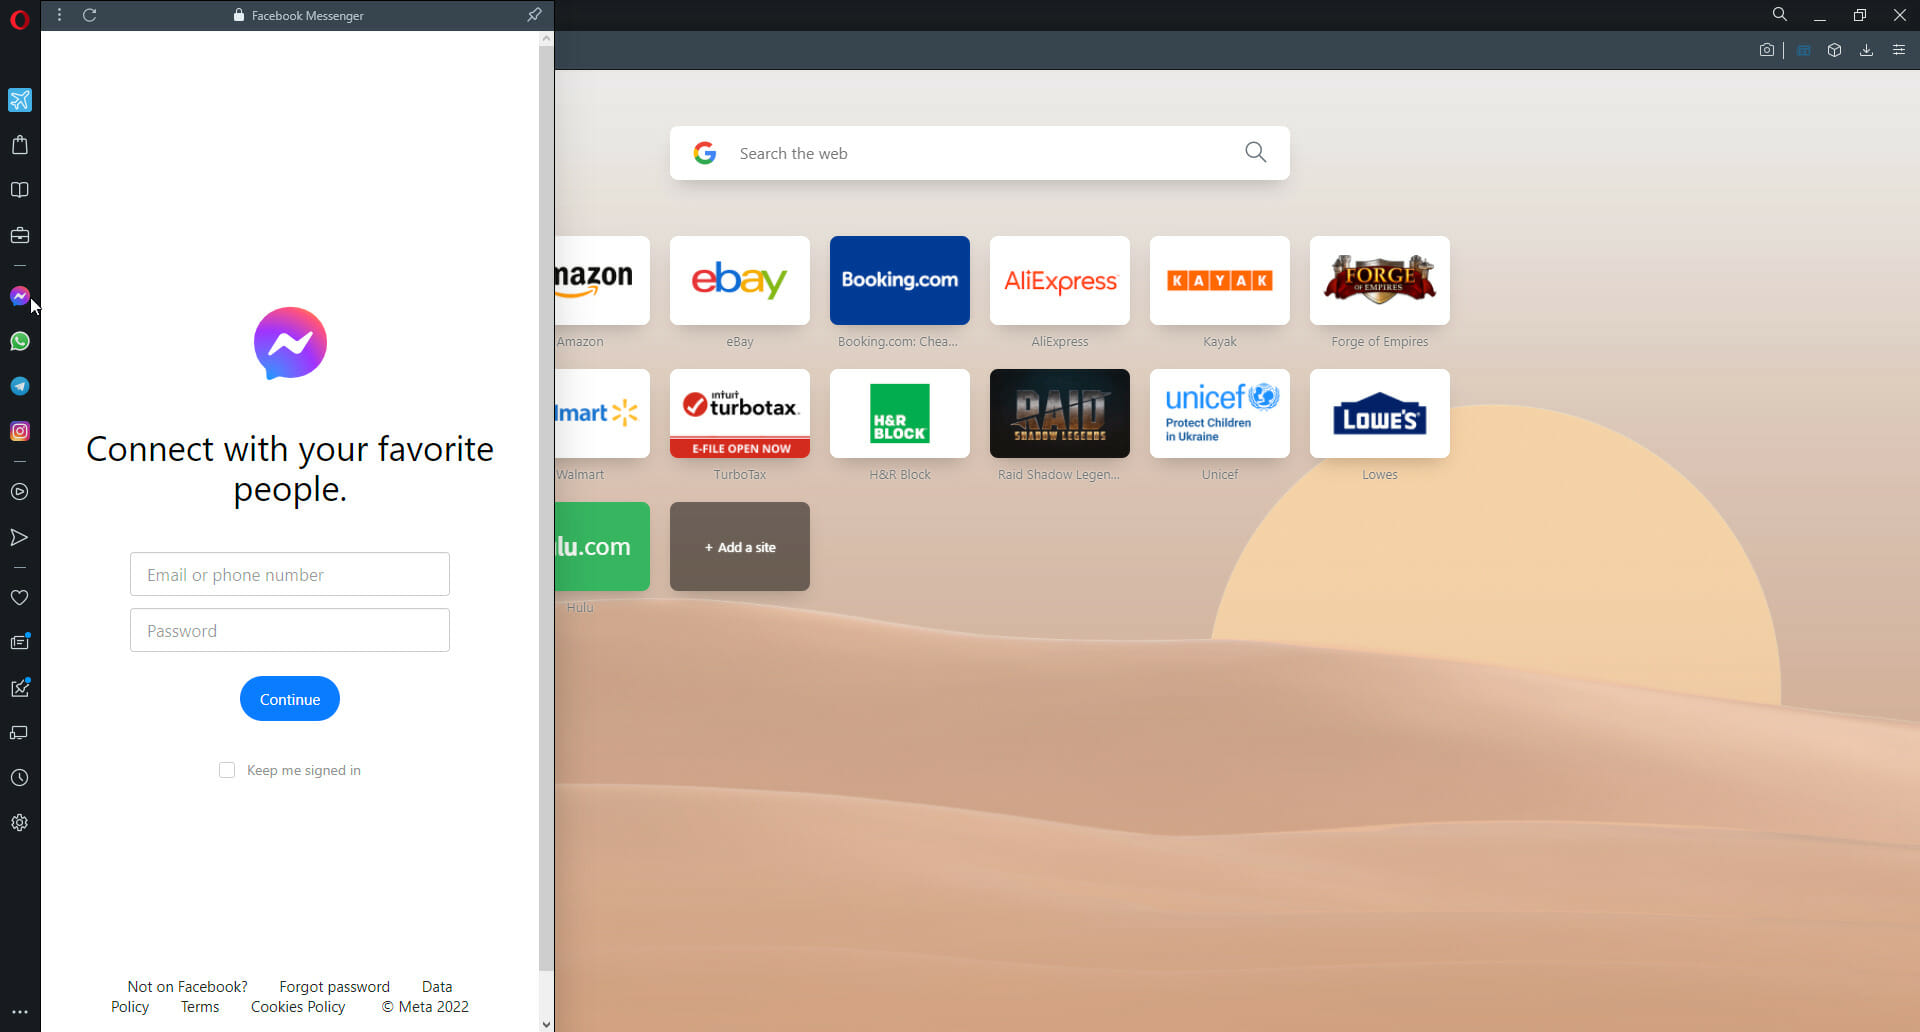 Opera browser integrated messaging.